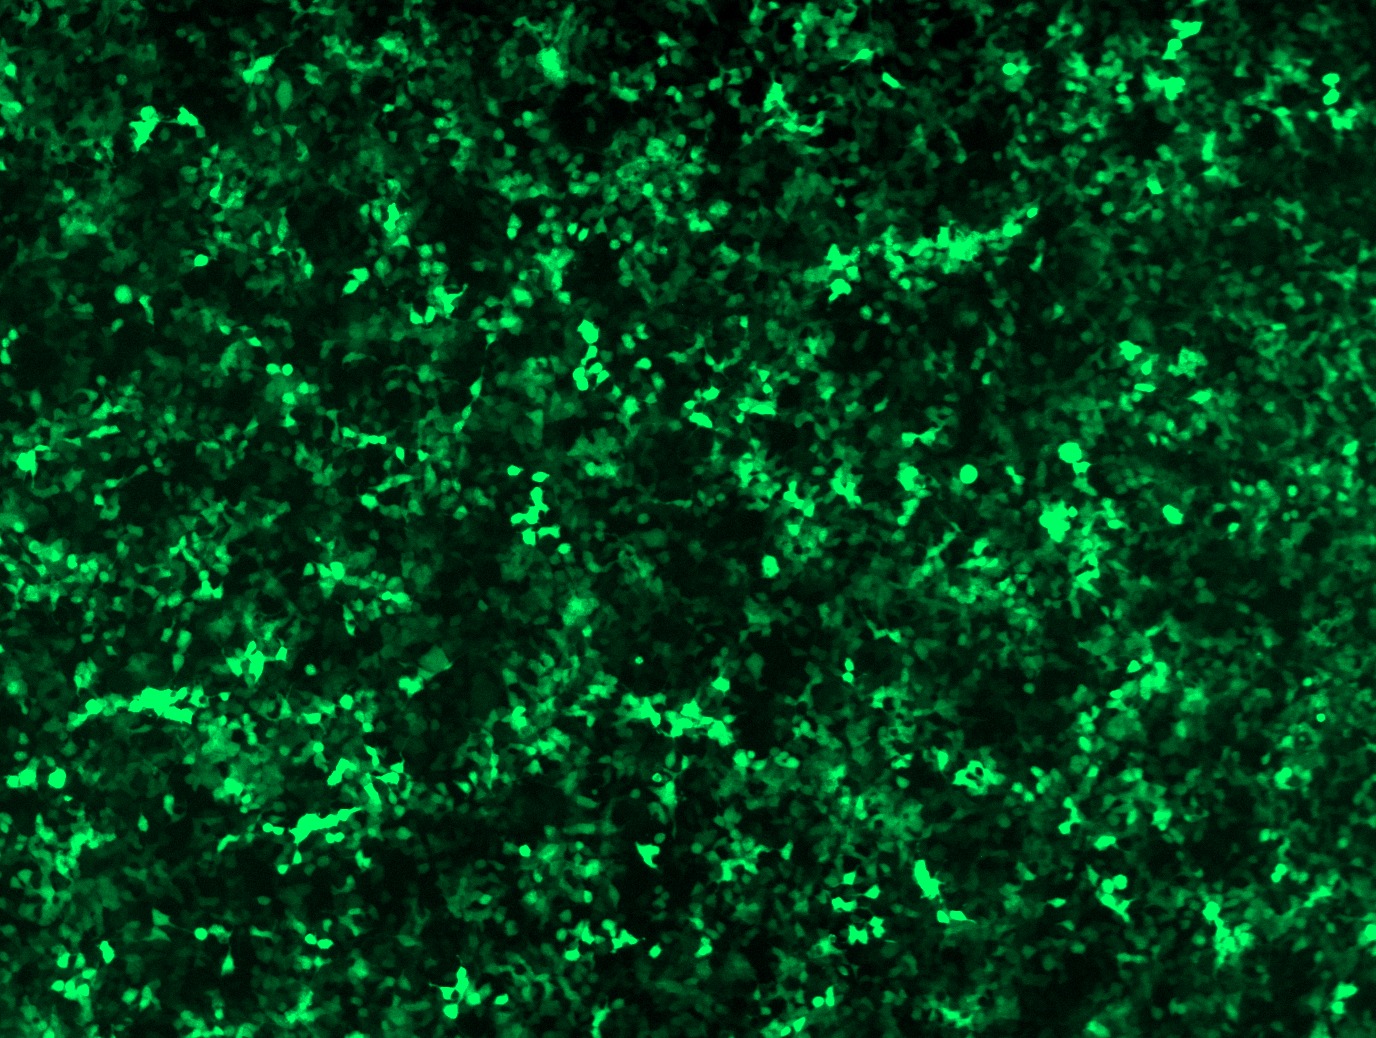 GFP signal was observed under microscope at 48 hours after transduction of TL500946A virus into HEK293 cells. TL500946A virus was prepared using lenti-shRNA TL500946A and TR30037 packaging kit.